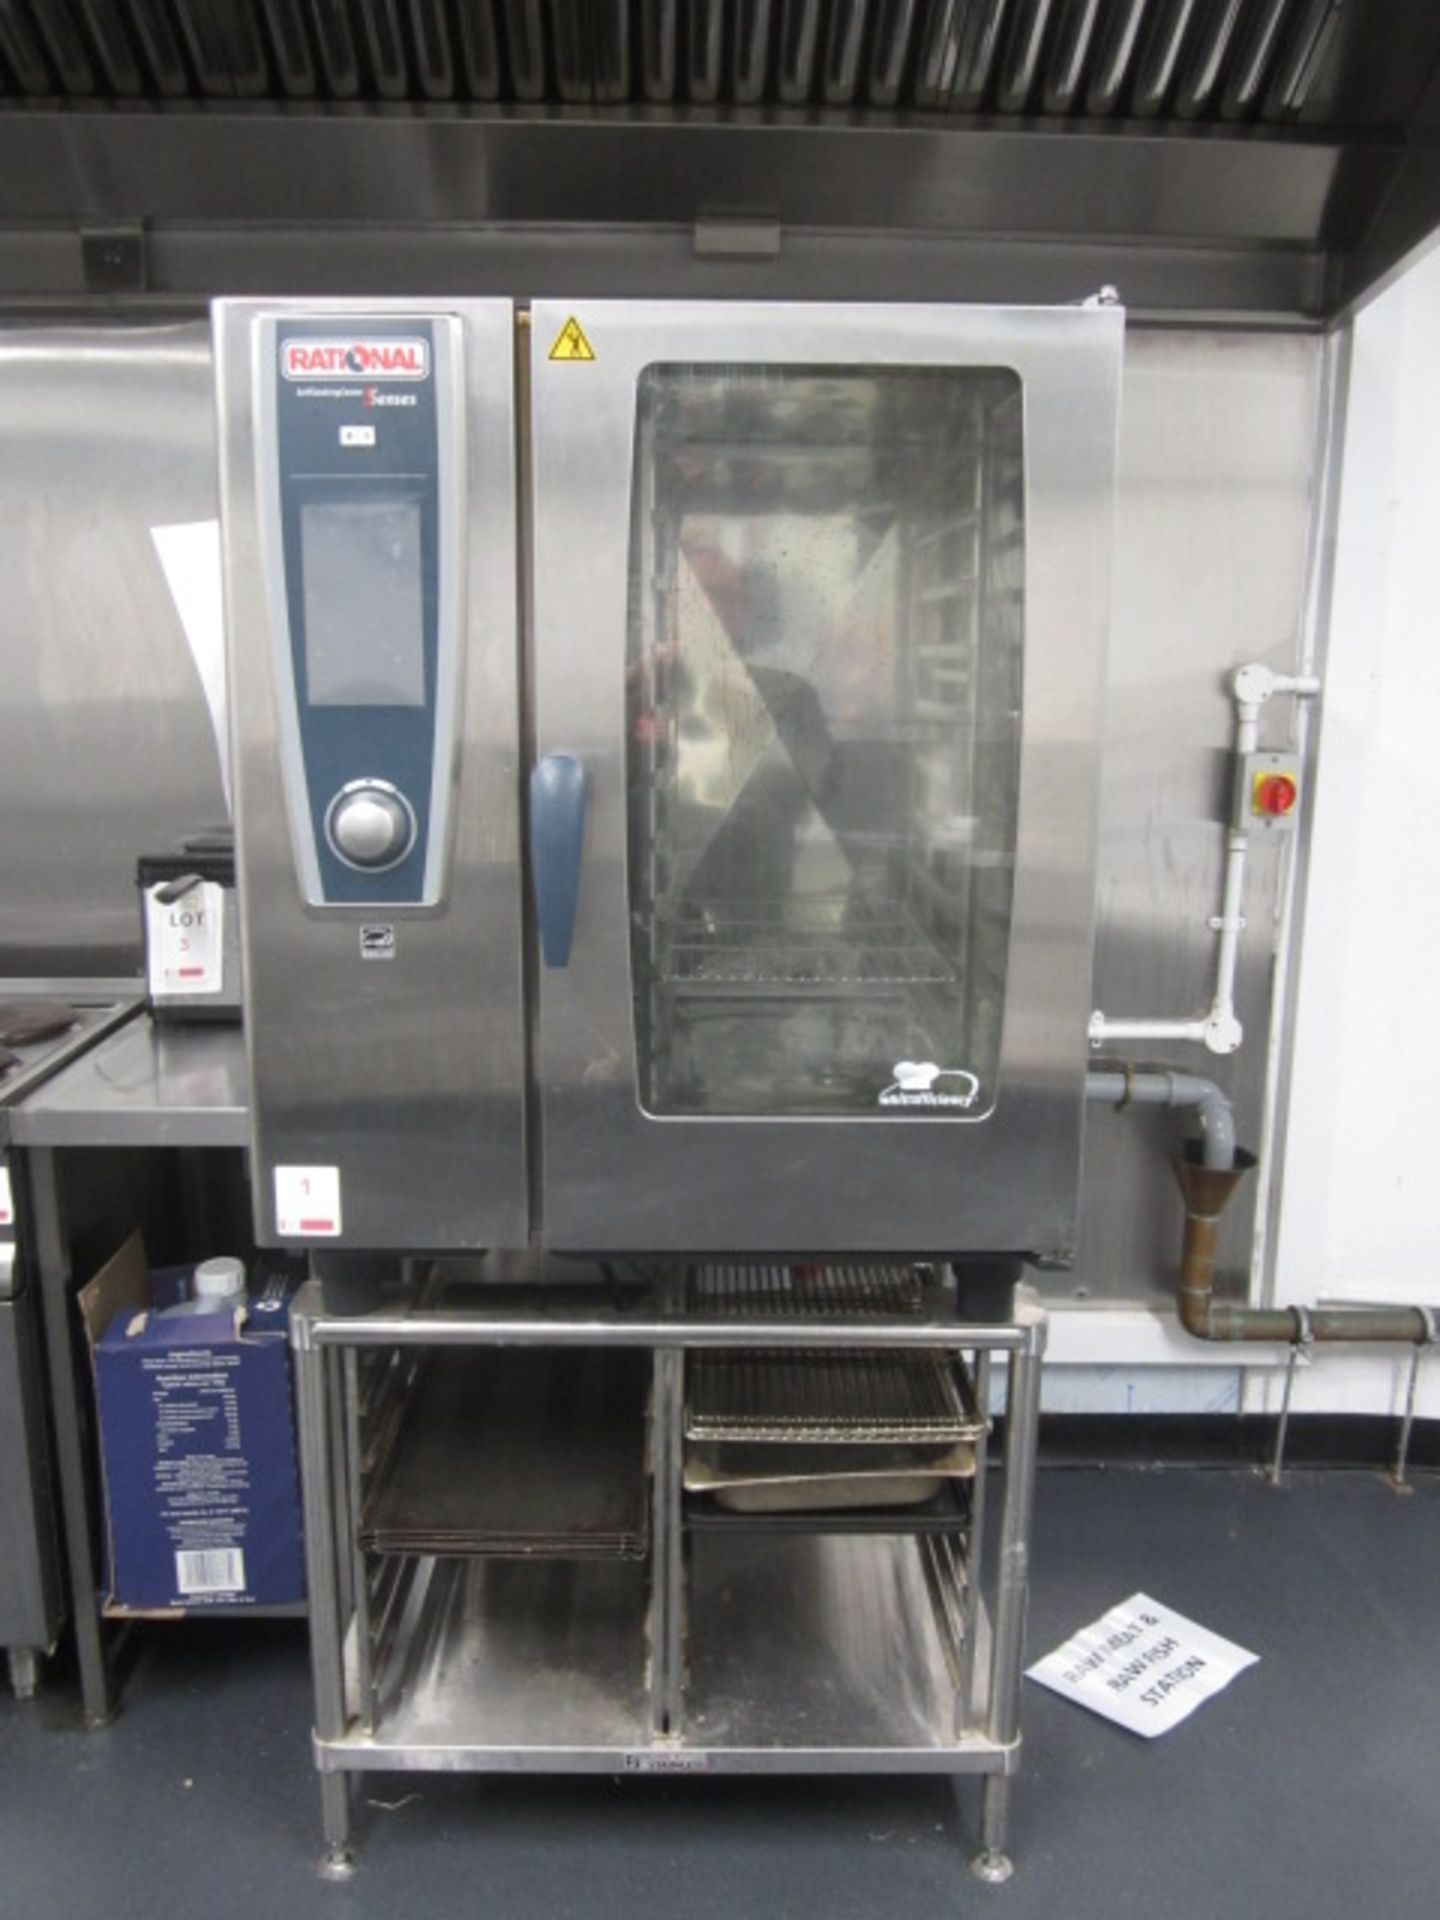 Rational 01 5 Series self-cooking centre, model SCC WE101, s/n: E11SH15022444863, mounted on tray